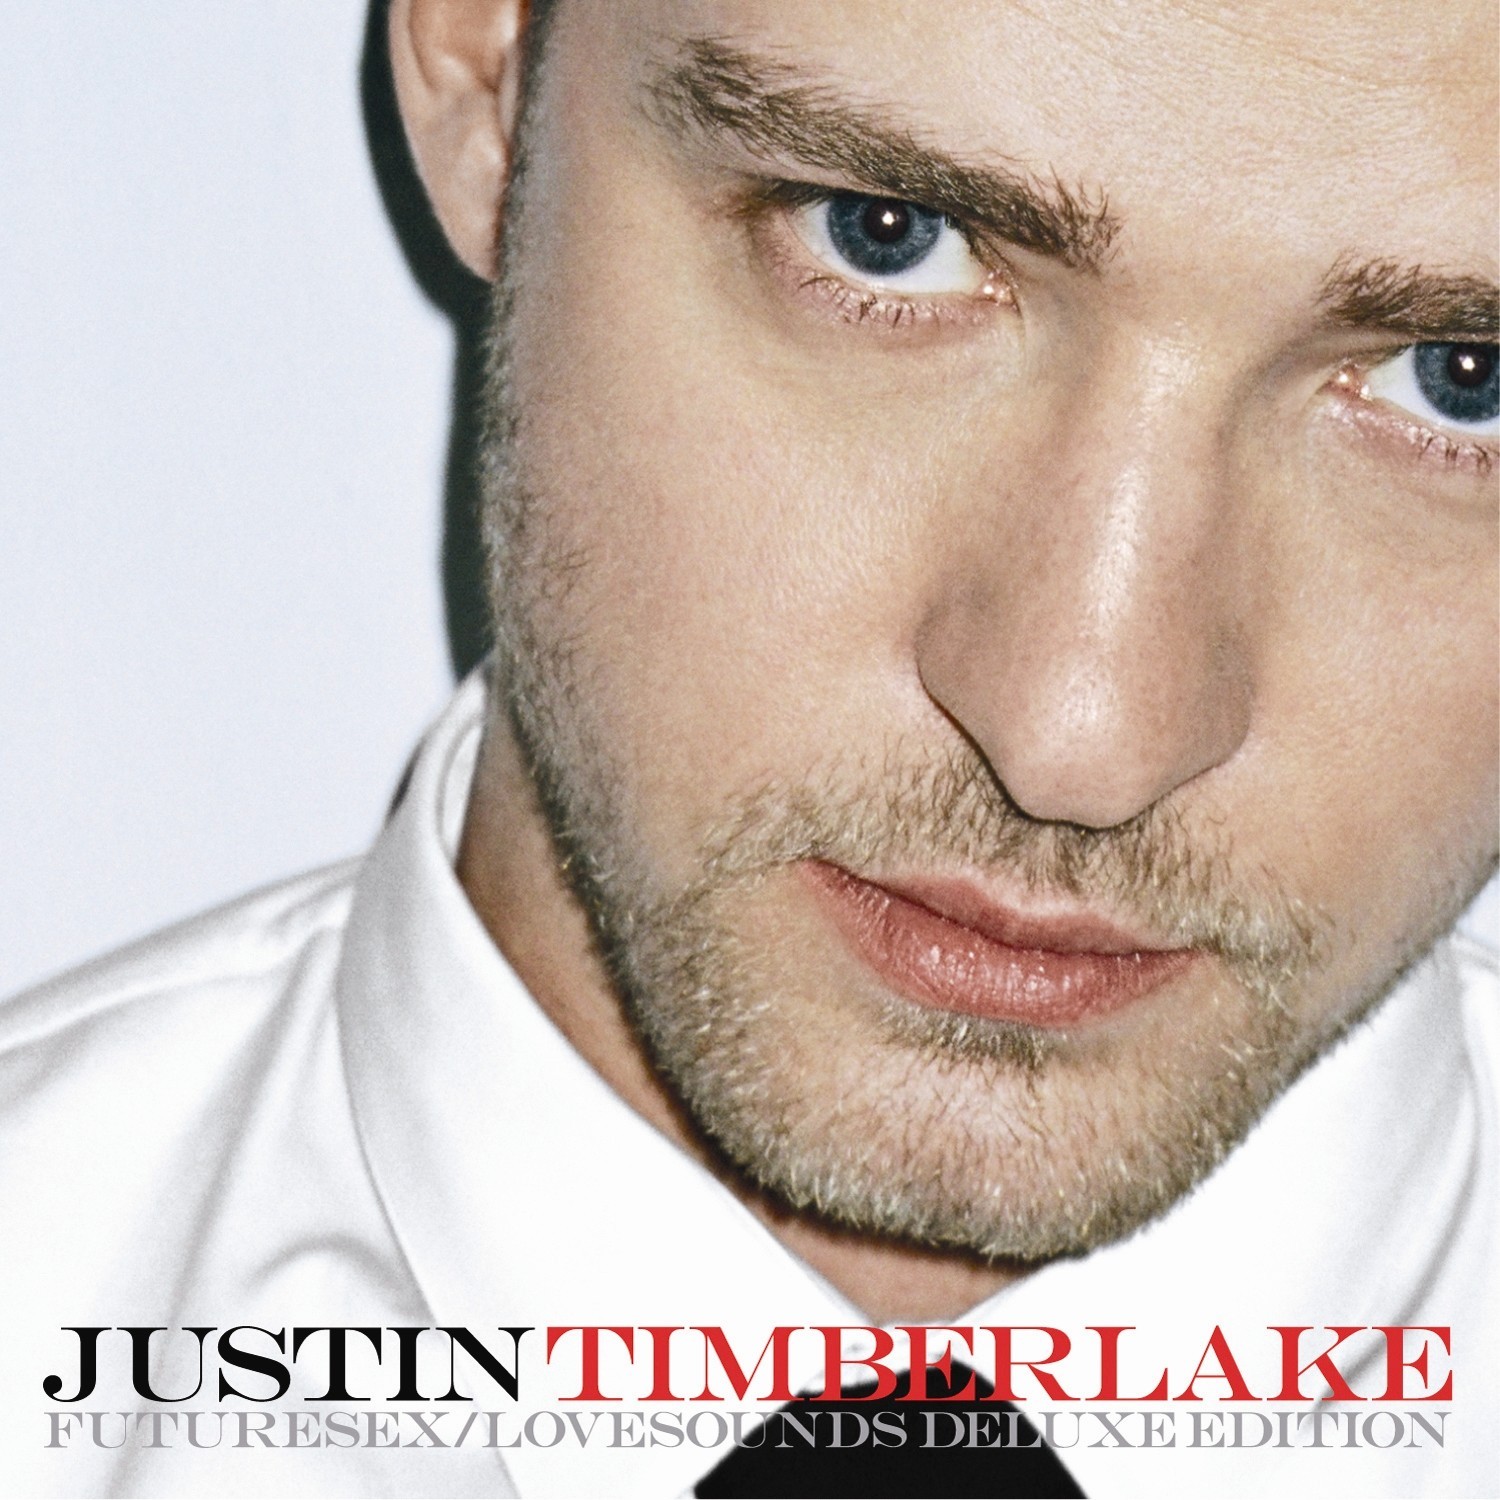 futuresex-lovesounds-deluxe-edition